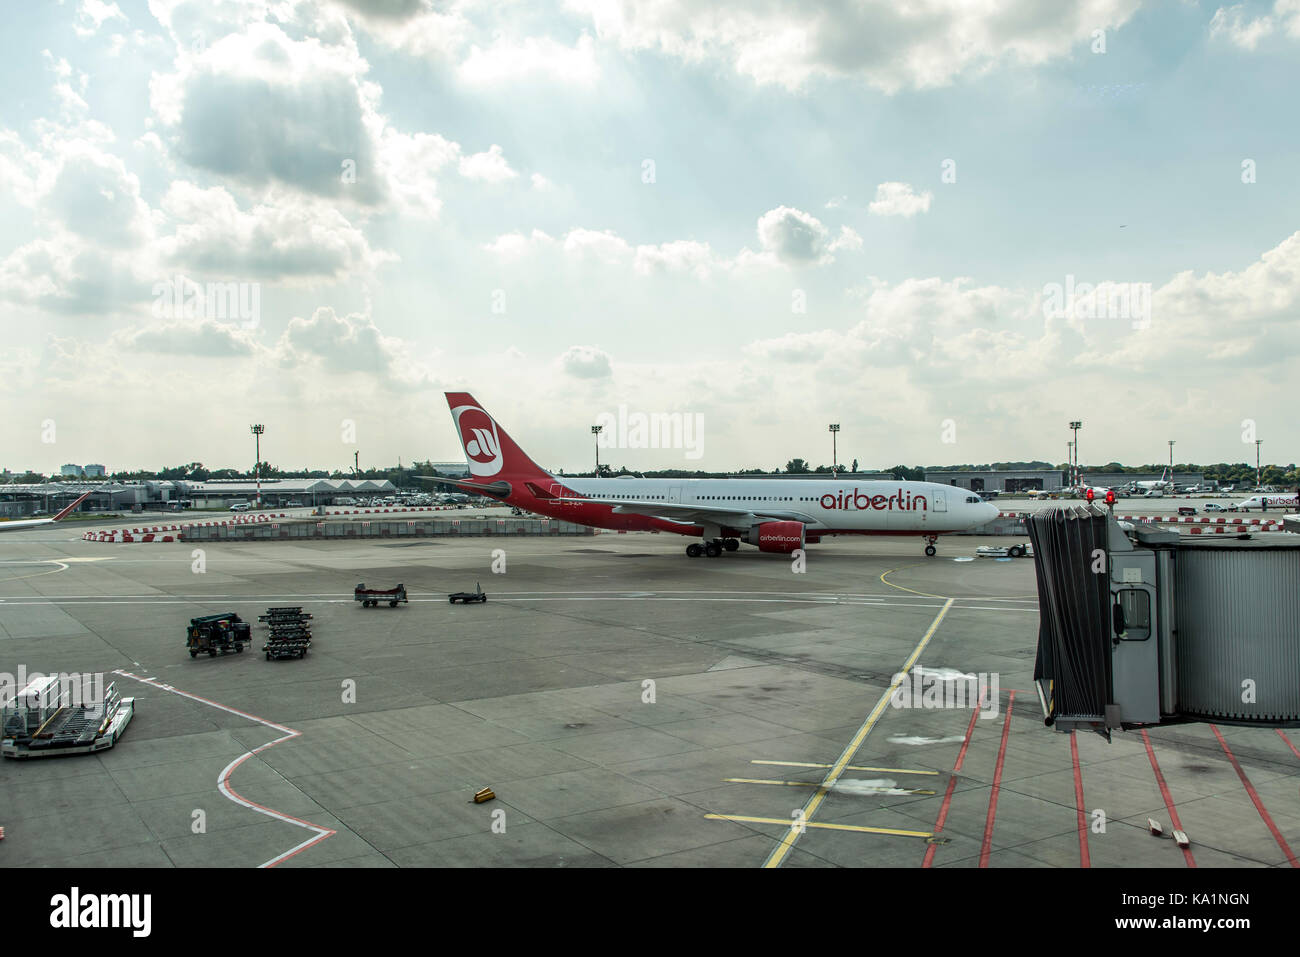 DUSSELDORF, GERMANY - SEPTEMBER 03, 2017: Airbus A320 Air Berlin at the airport of Dusseldorf while taxiing Stock Photo